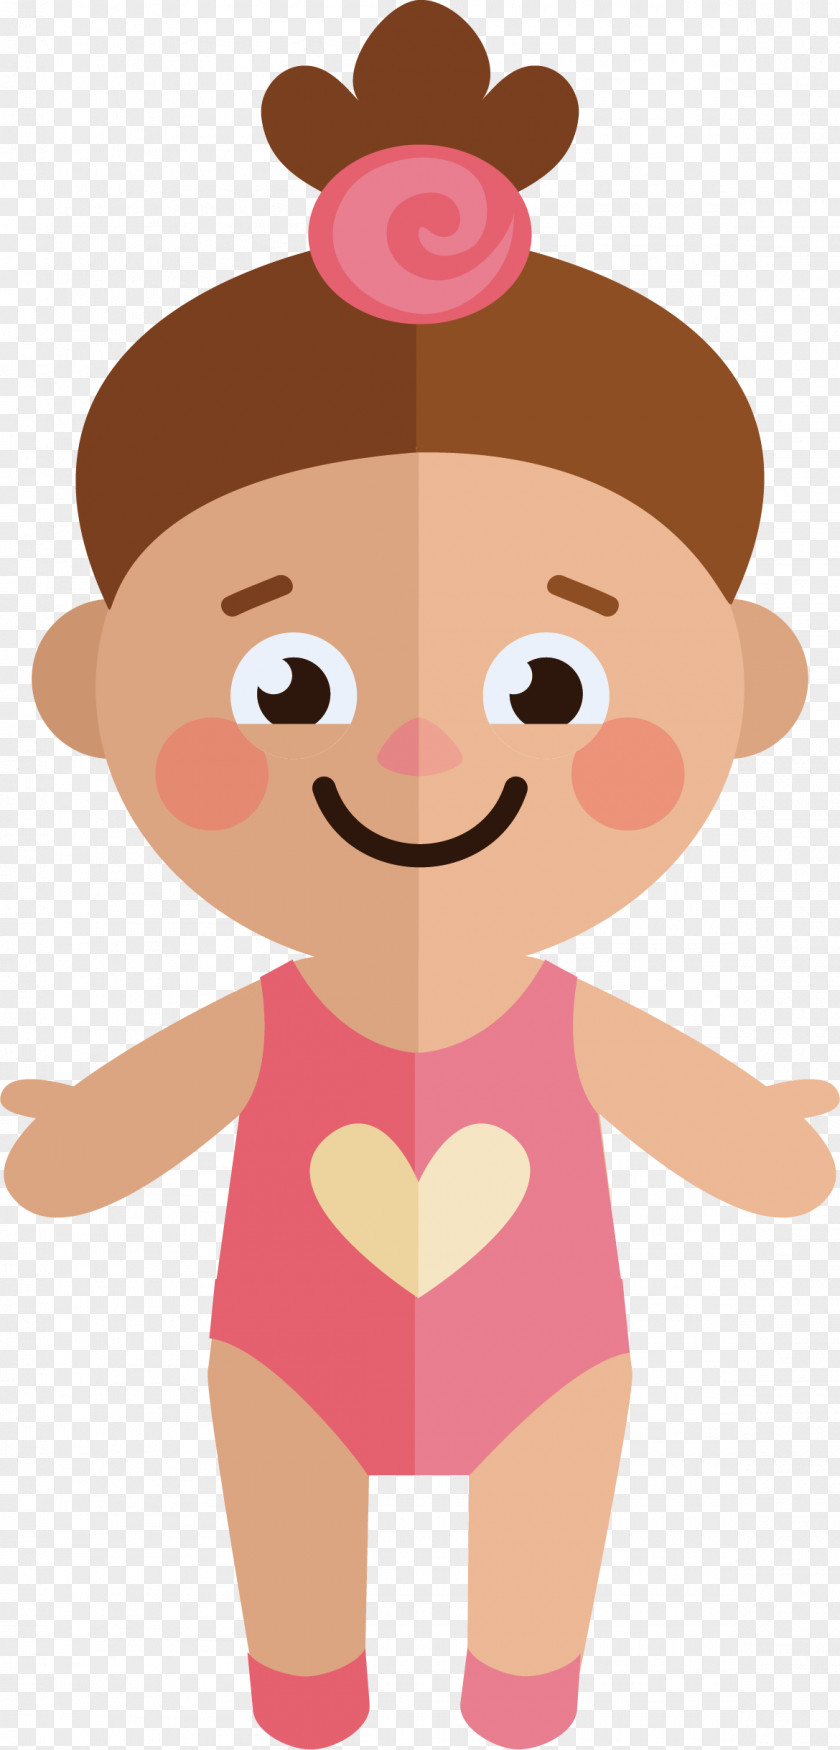 Cute Child Vector Illustration PNG